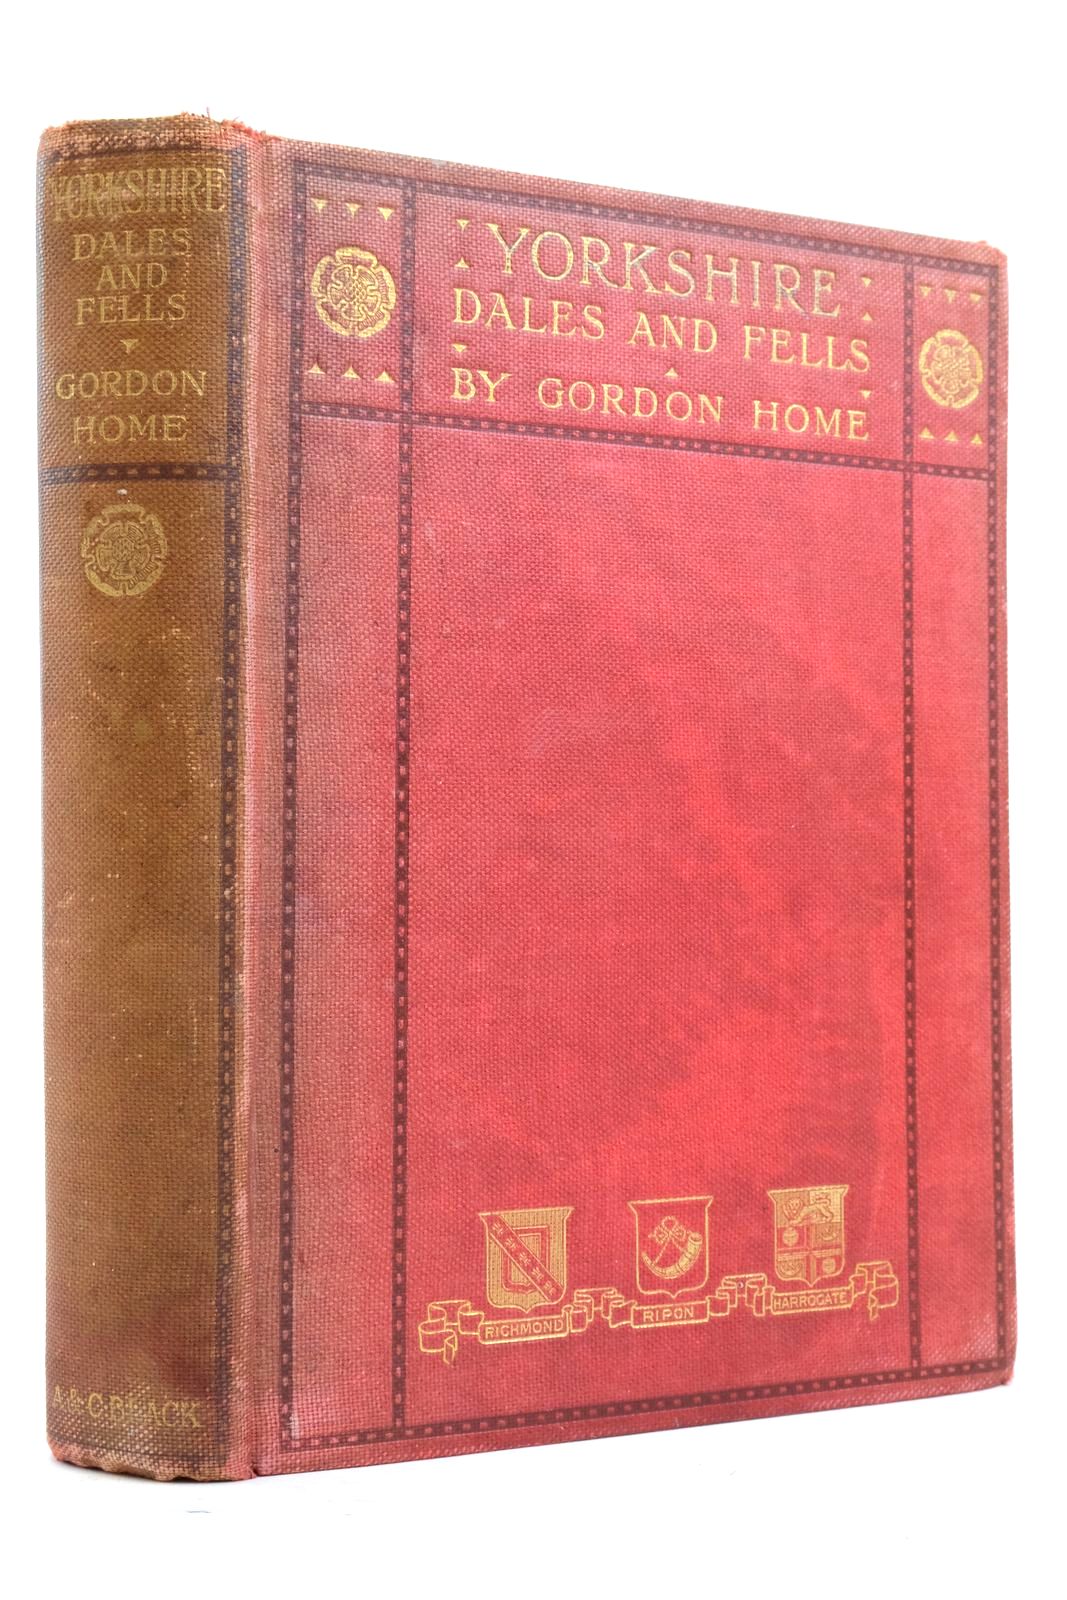 Photo of YORKSHIRE DALES AND FELLS written by Home, Gordon illustrated by Home, Gordon published by A. &amp; C. Black (STOCK CODE: 2137120)  for sale by Stella & Rose's Books